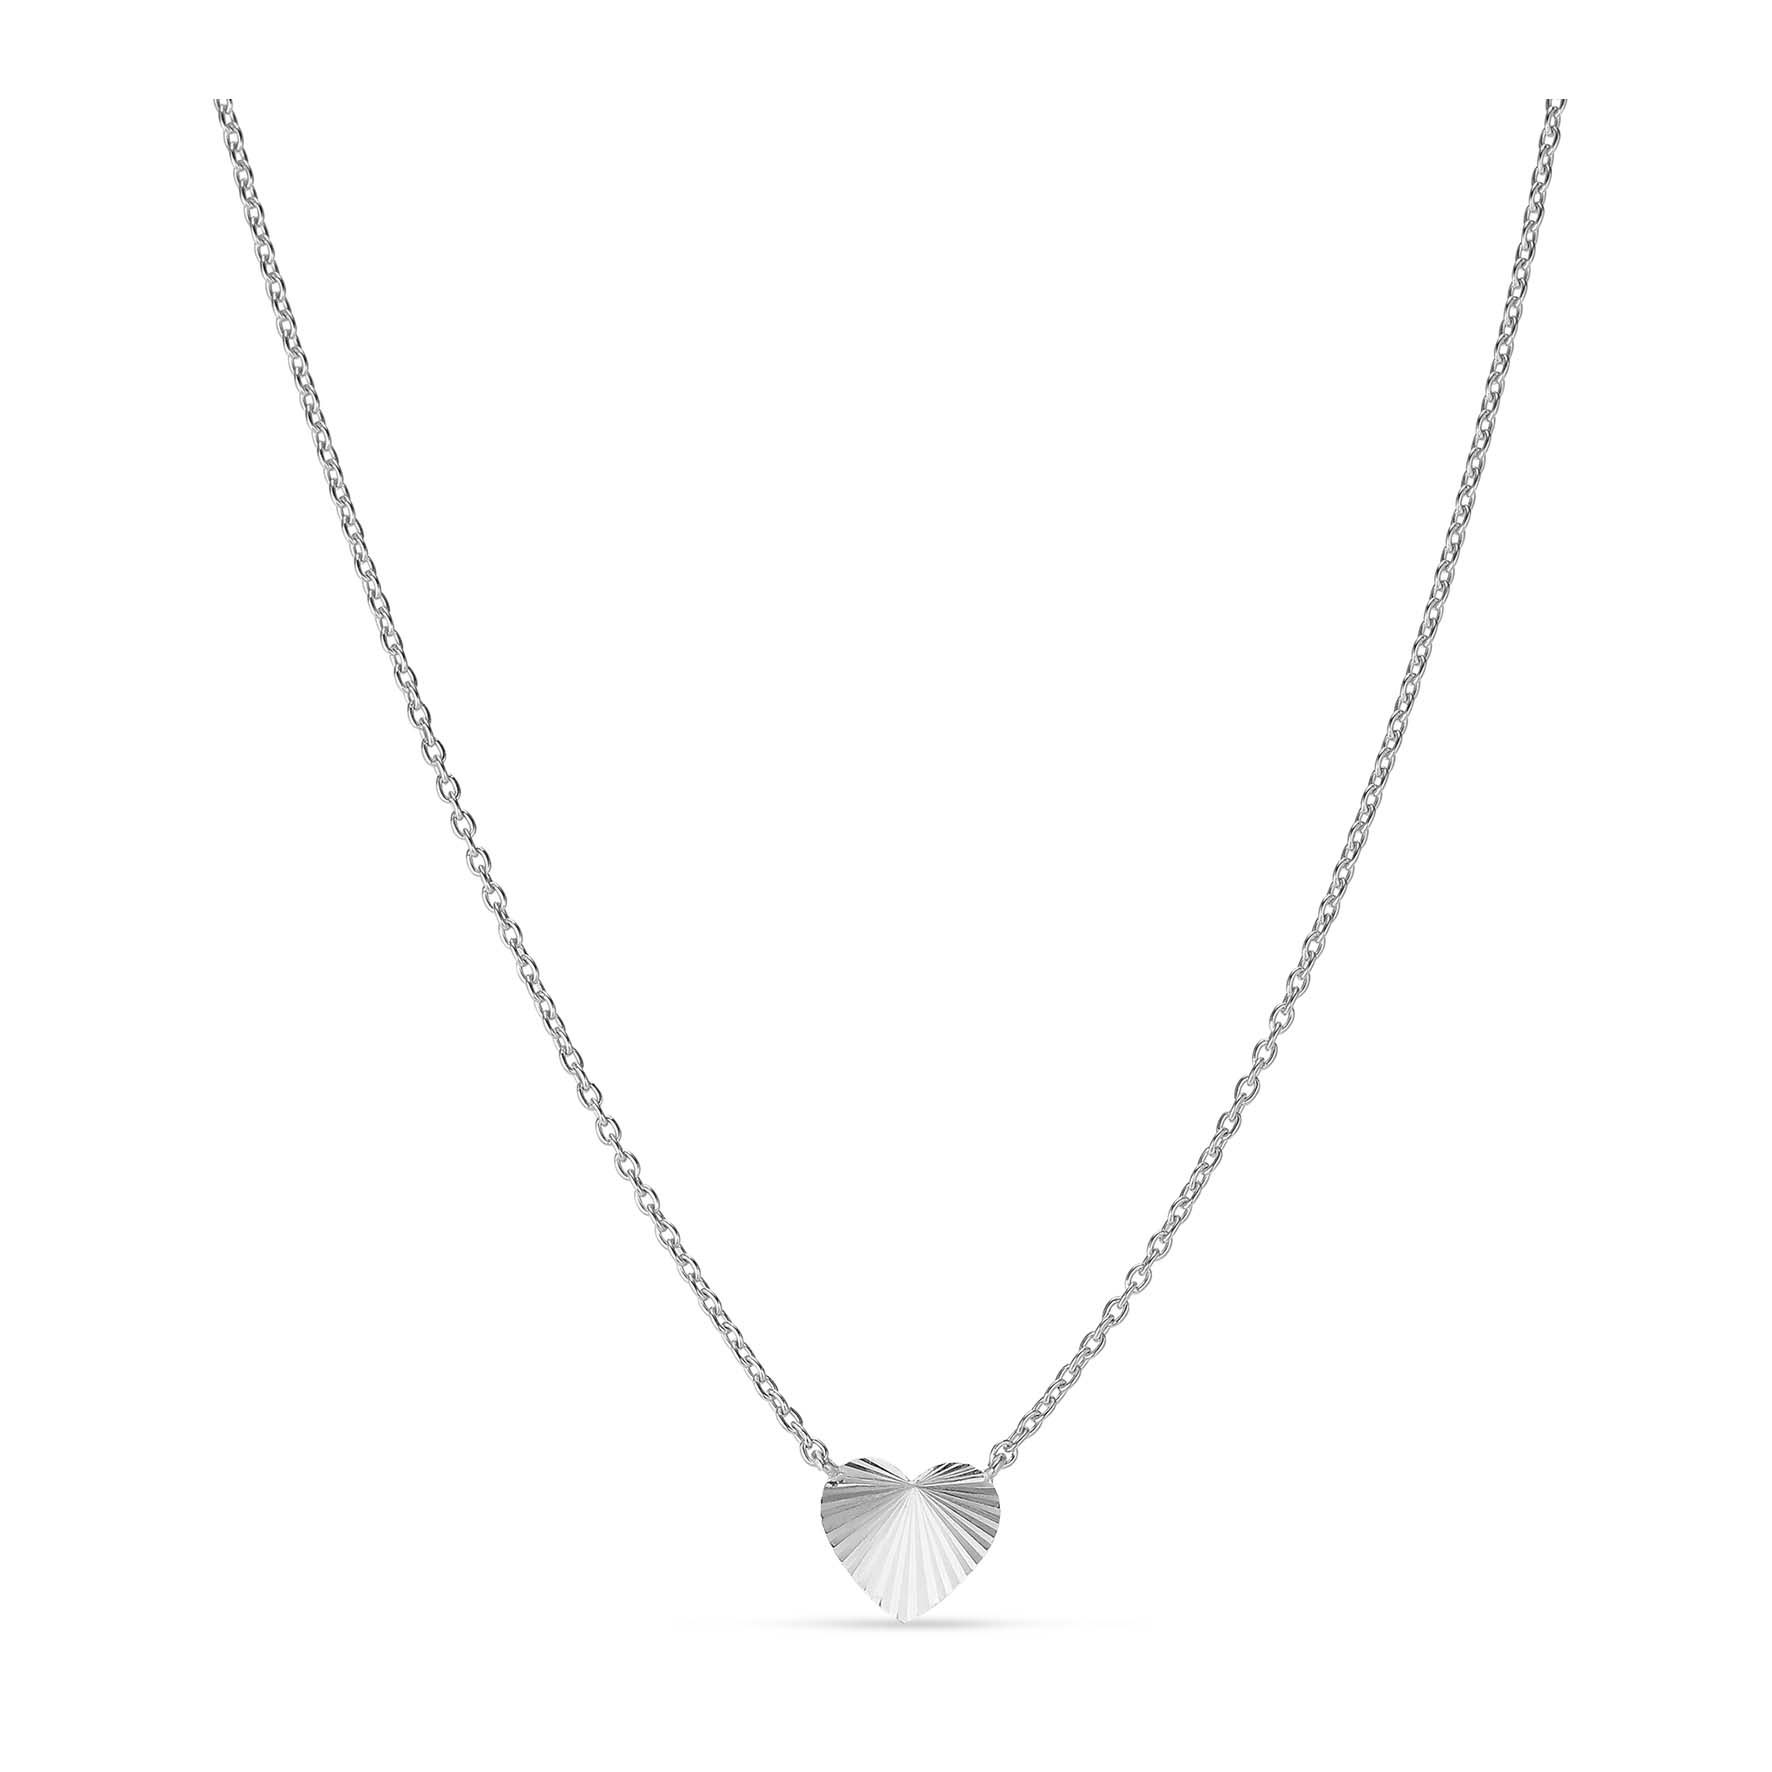 Reflection Heart Necklace from Jane Kønig in Silver Sterling 925